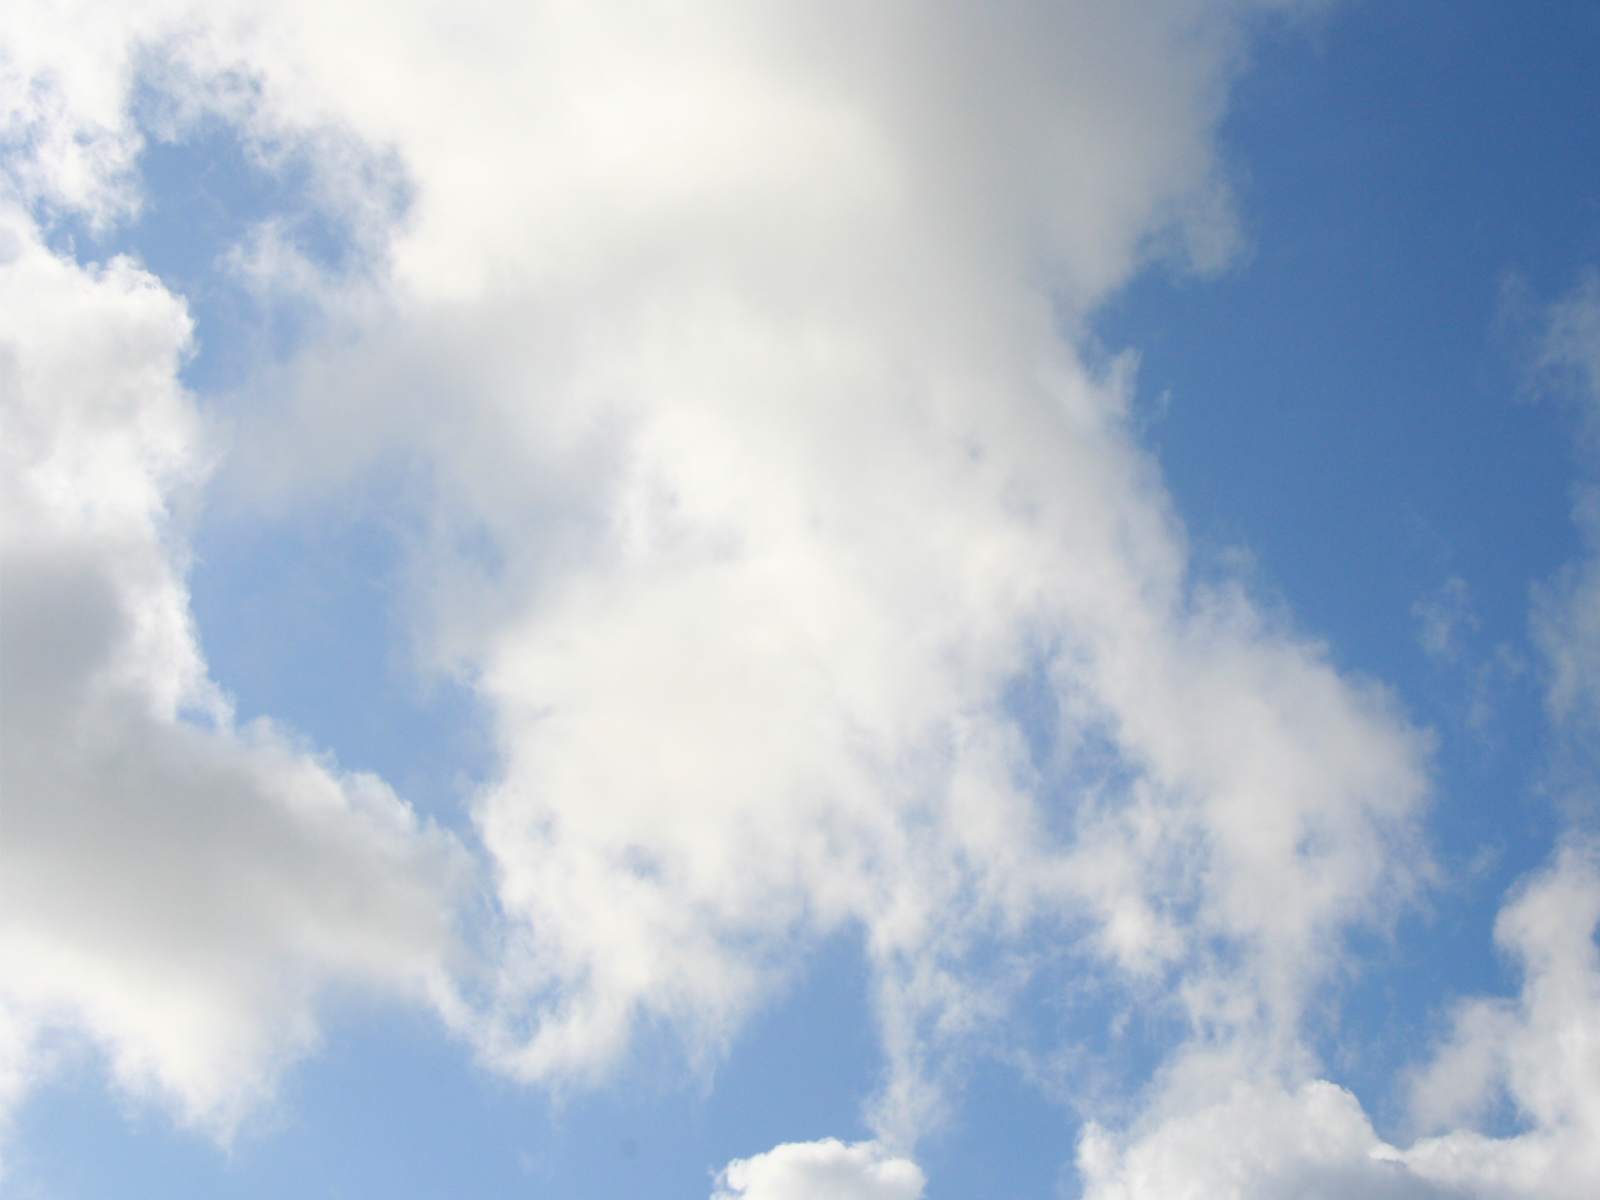 Thoughtful white clouds in a blue sky - just lie back in your mind, destress and relax!